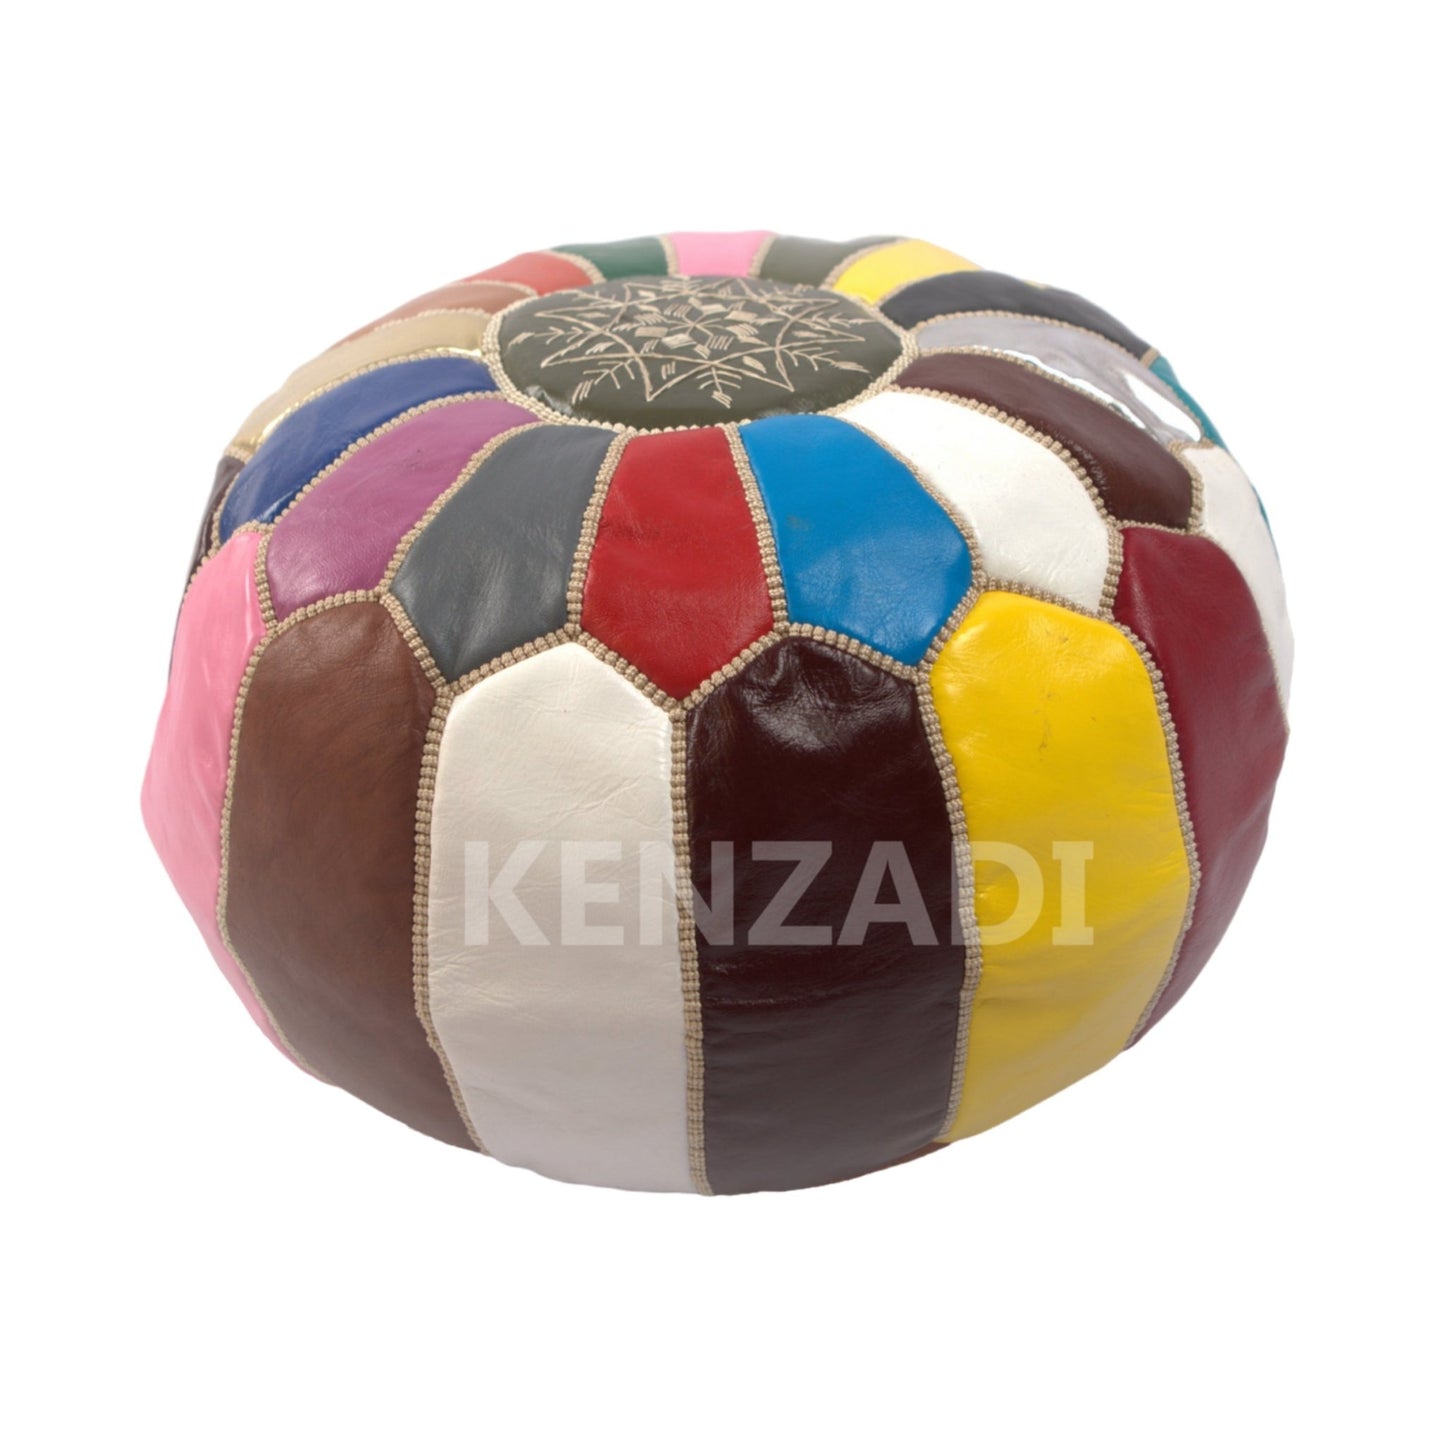 Moroccan leather Pouf, round Pouf, berber Pouf, Colorful Pouf with Beige embroidery by Kenzadi - Handmade by My Poufs